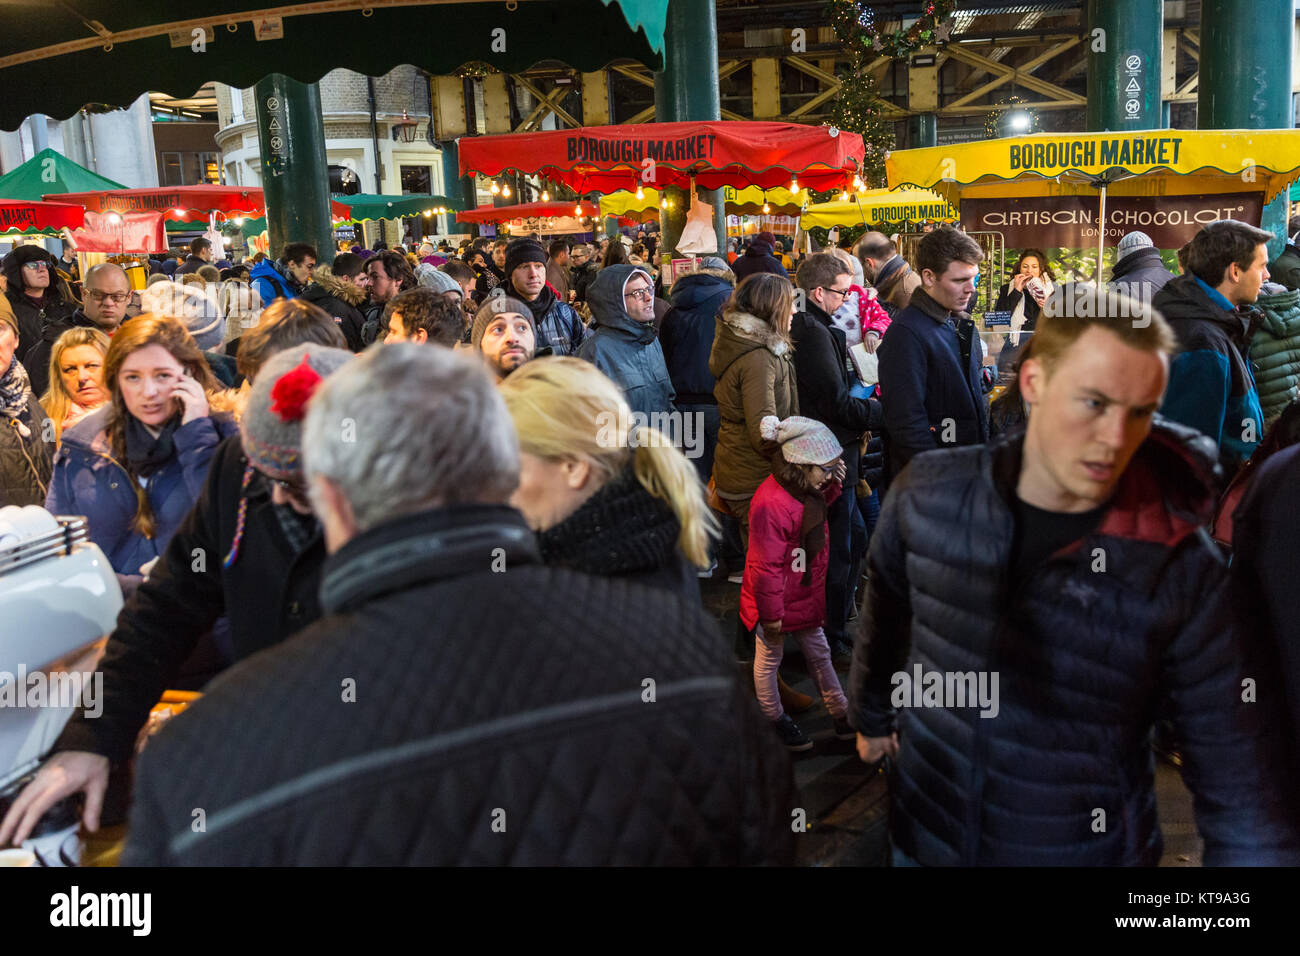 Crowds in Borough Market, people shopping and browsing in the market halls, Southwark, London, UK Stock Photo